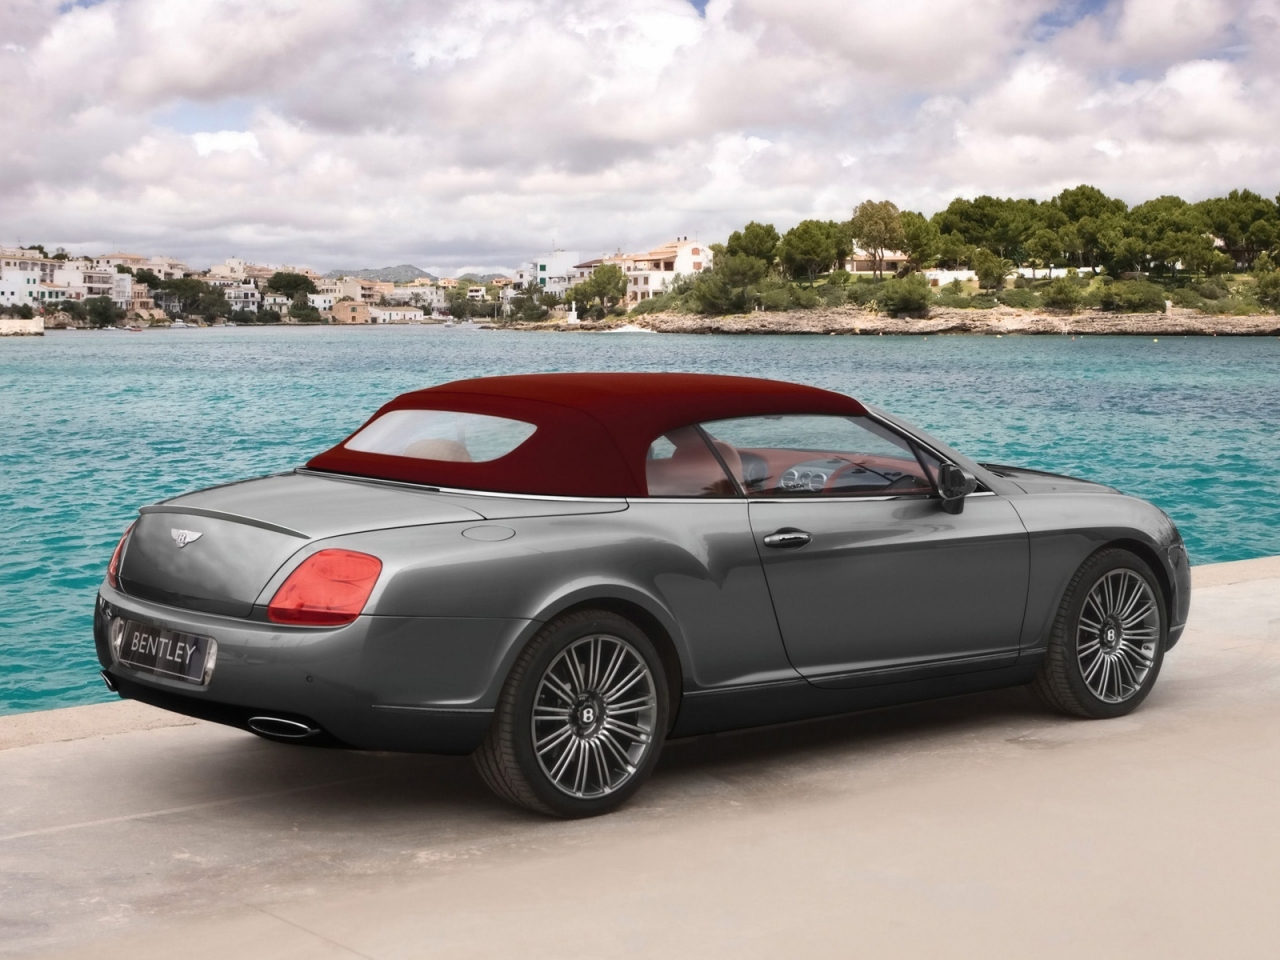 Bentley Continental GTC 2009 for 1280 x 960 resolution